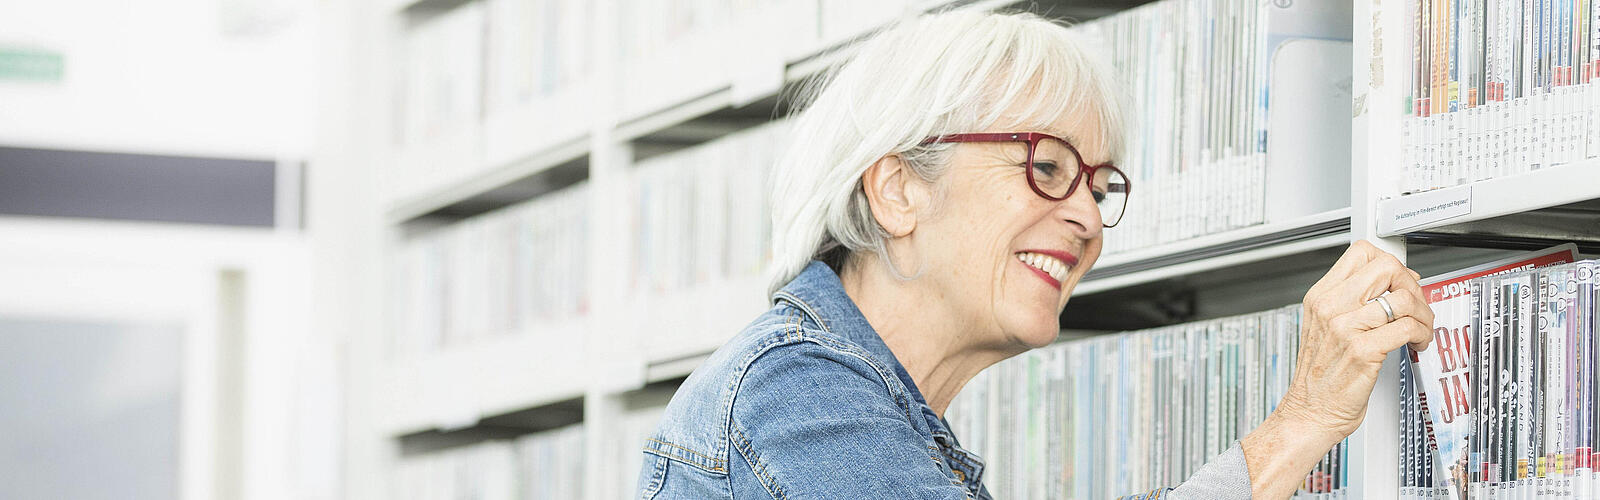 Older woman smiling and pulling DVD from shelf in library